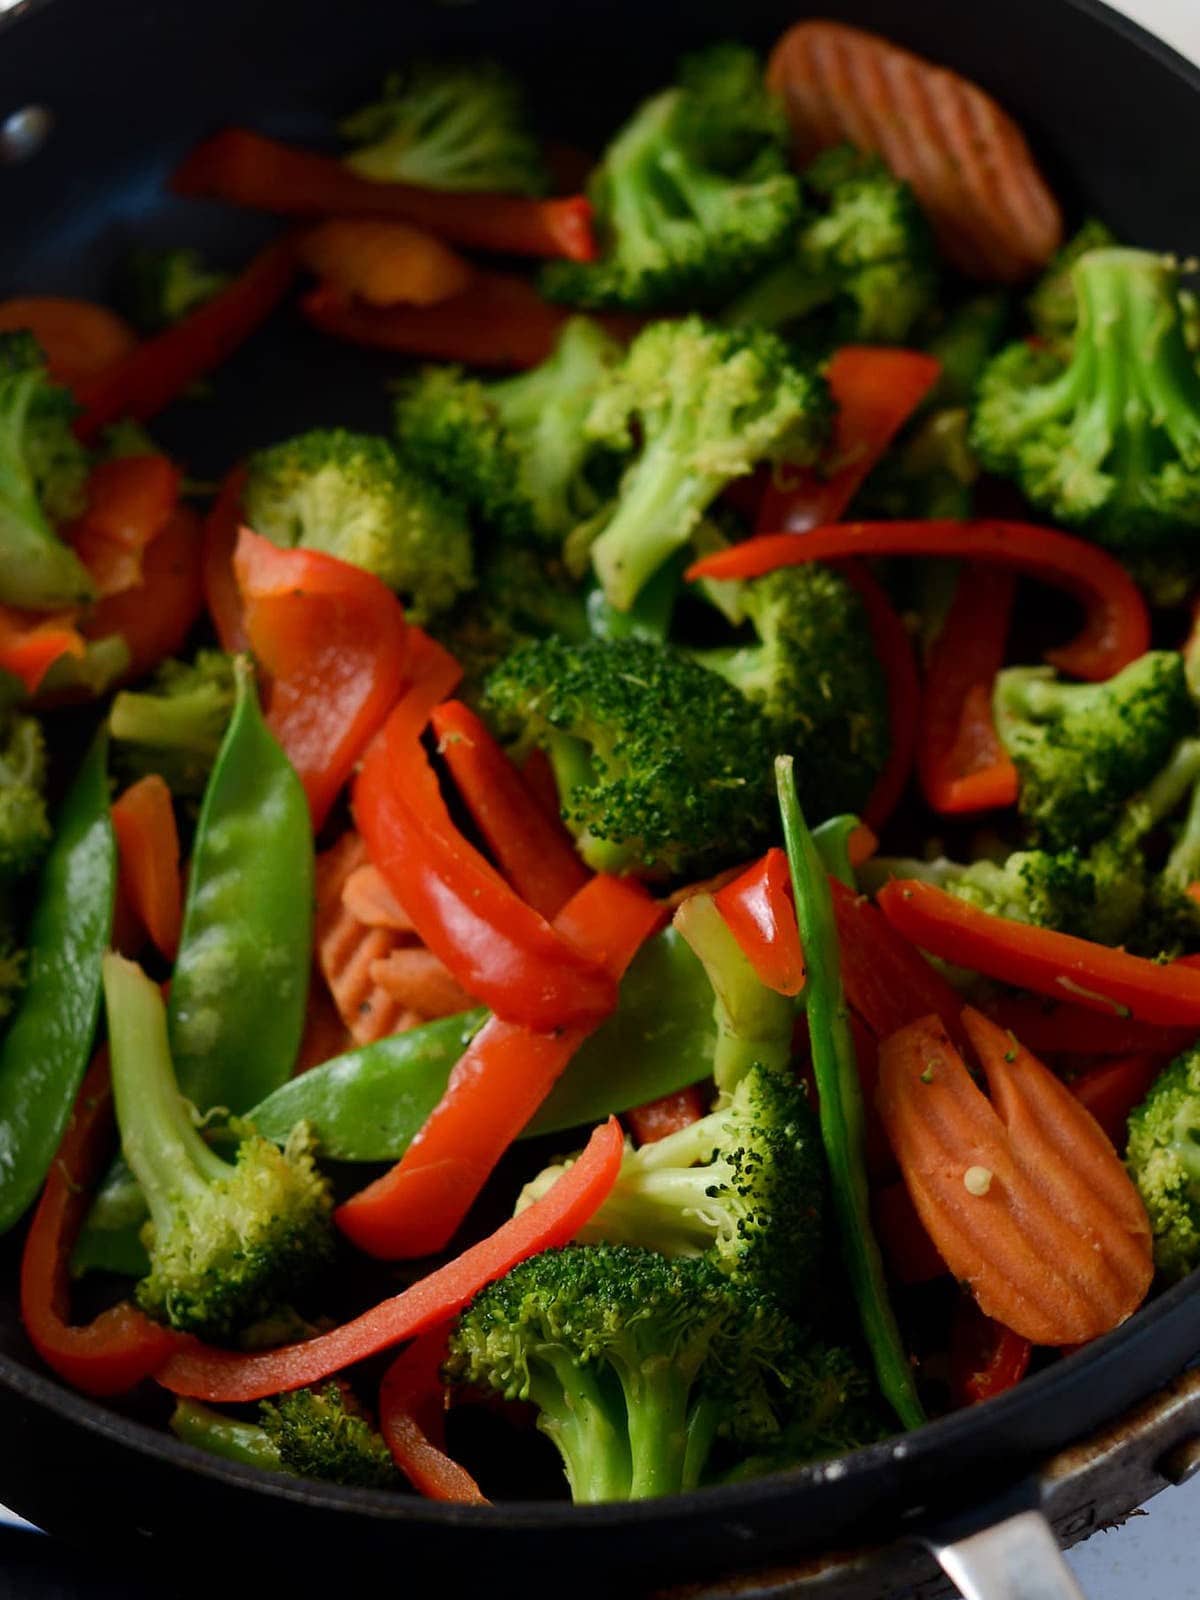 This is a photo of stir fried vegetables.